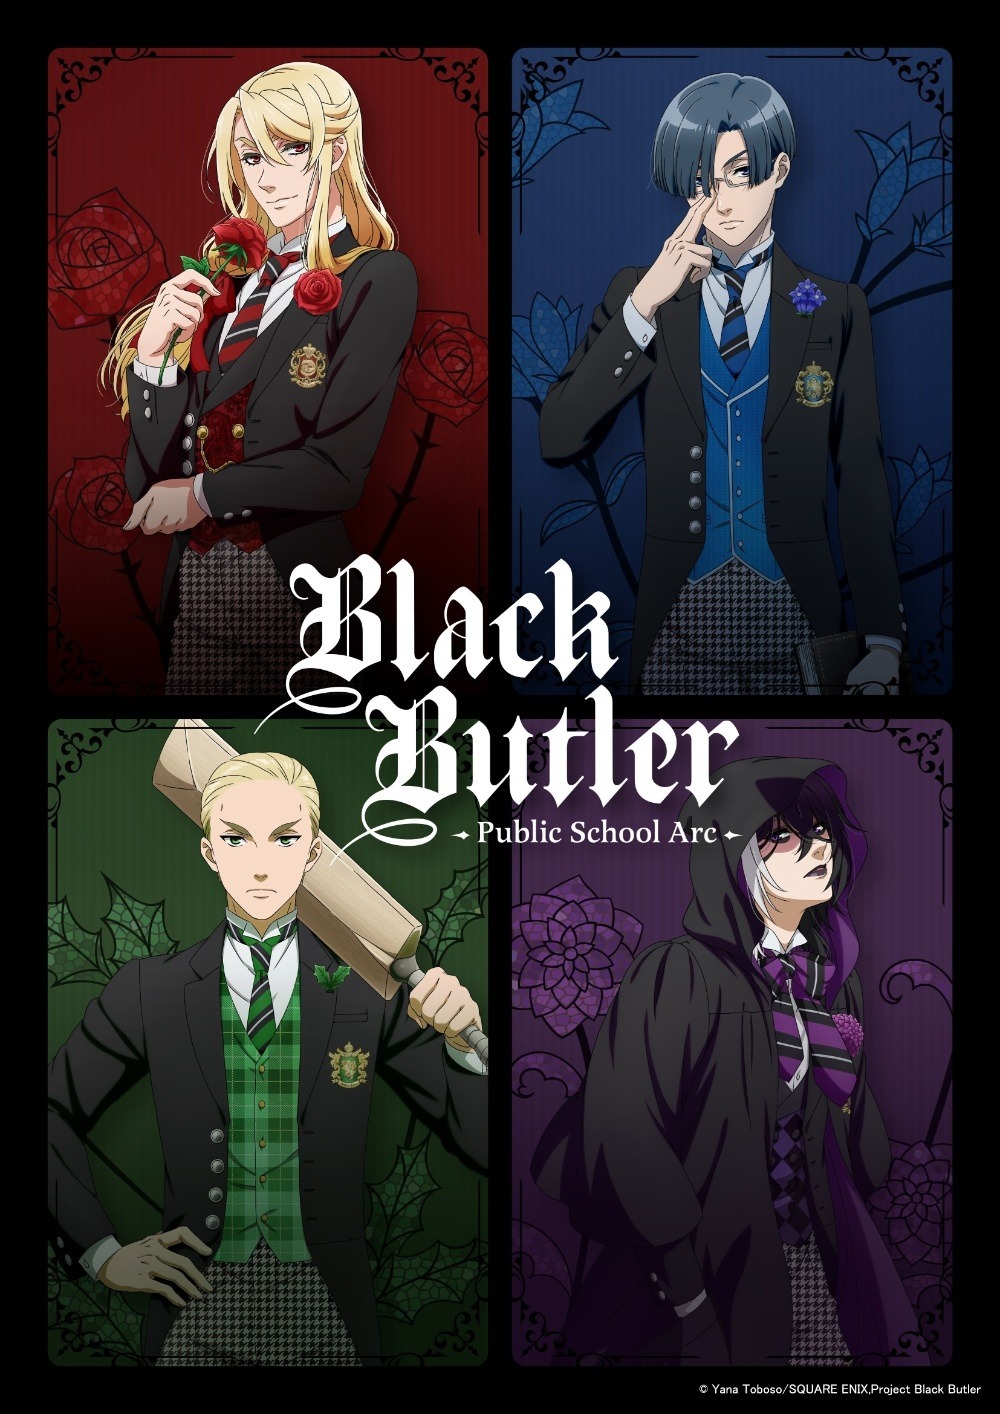 New Black Butler Season Announced For 2024!, Gallery posted by Anime+